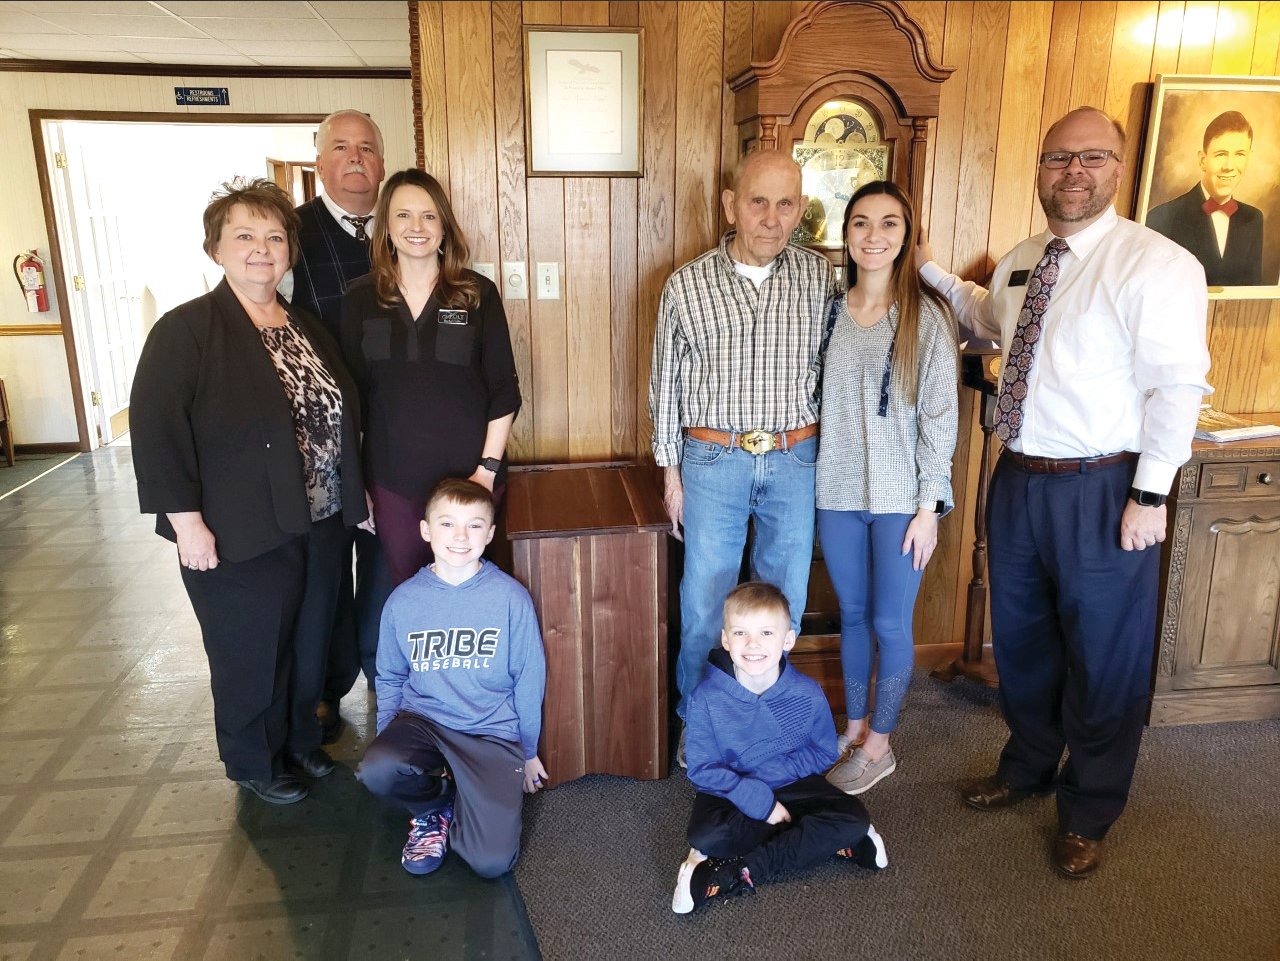 Holt Memorial Chapel took possession of their new flag receptacle in January. The box was built and delivered by Mr. Howard Moore. Pictured (standing, from left) Jackie and John Conner, Rachel Collie, Howard and Kaylee Moore (Howard's granddaughter) and Phillip Collie (seated) Conner and Carson Collie.